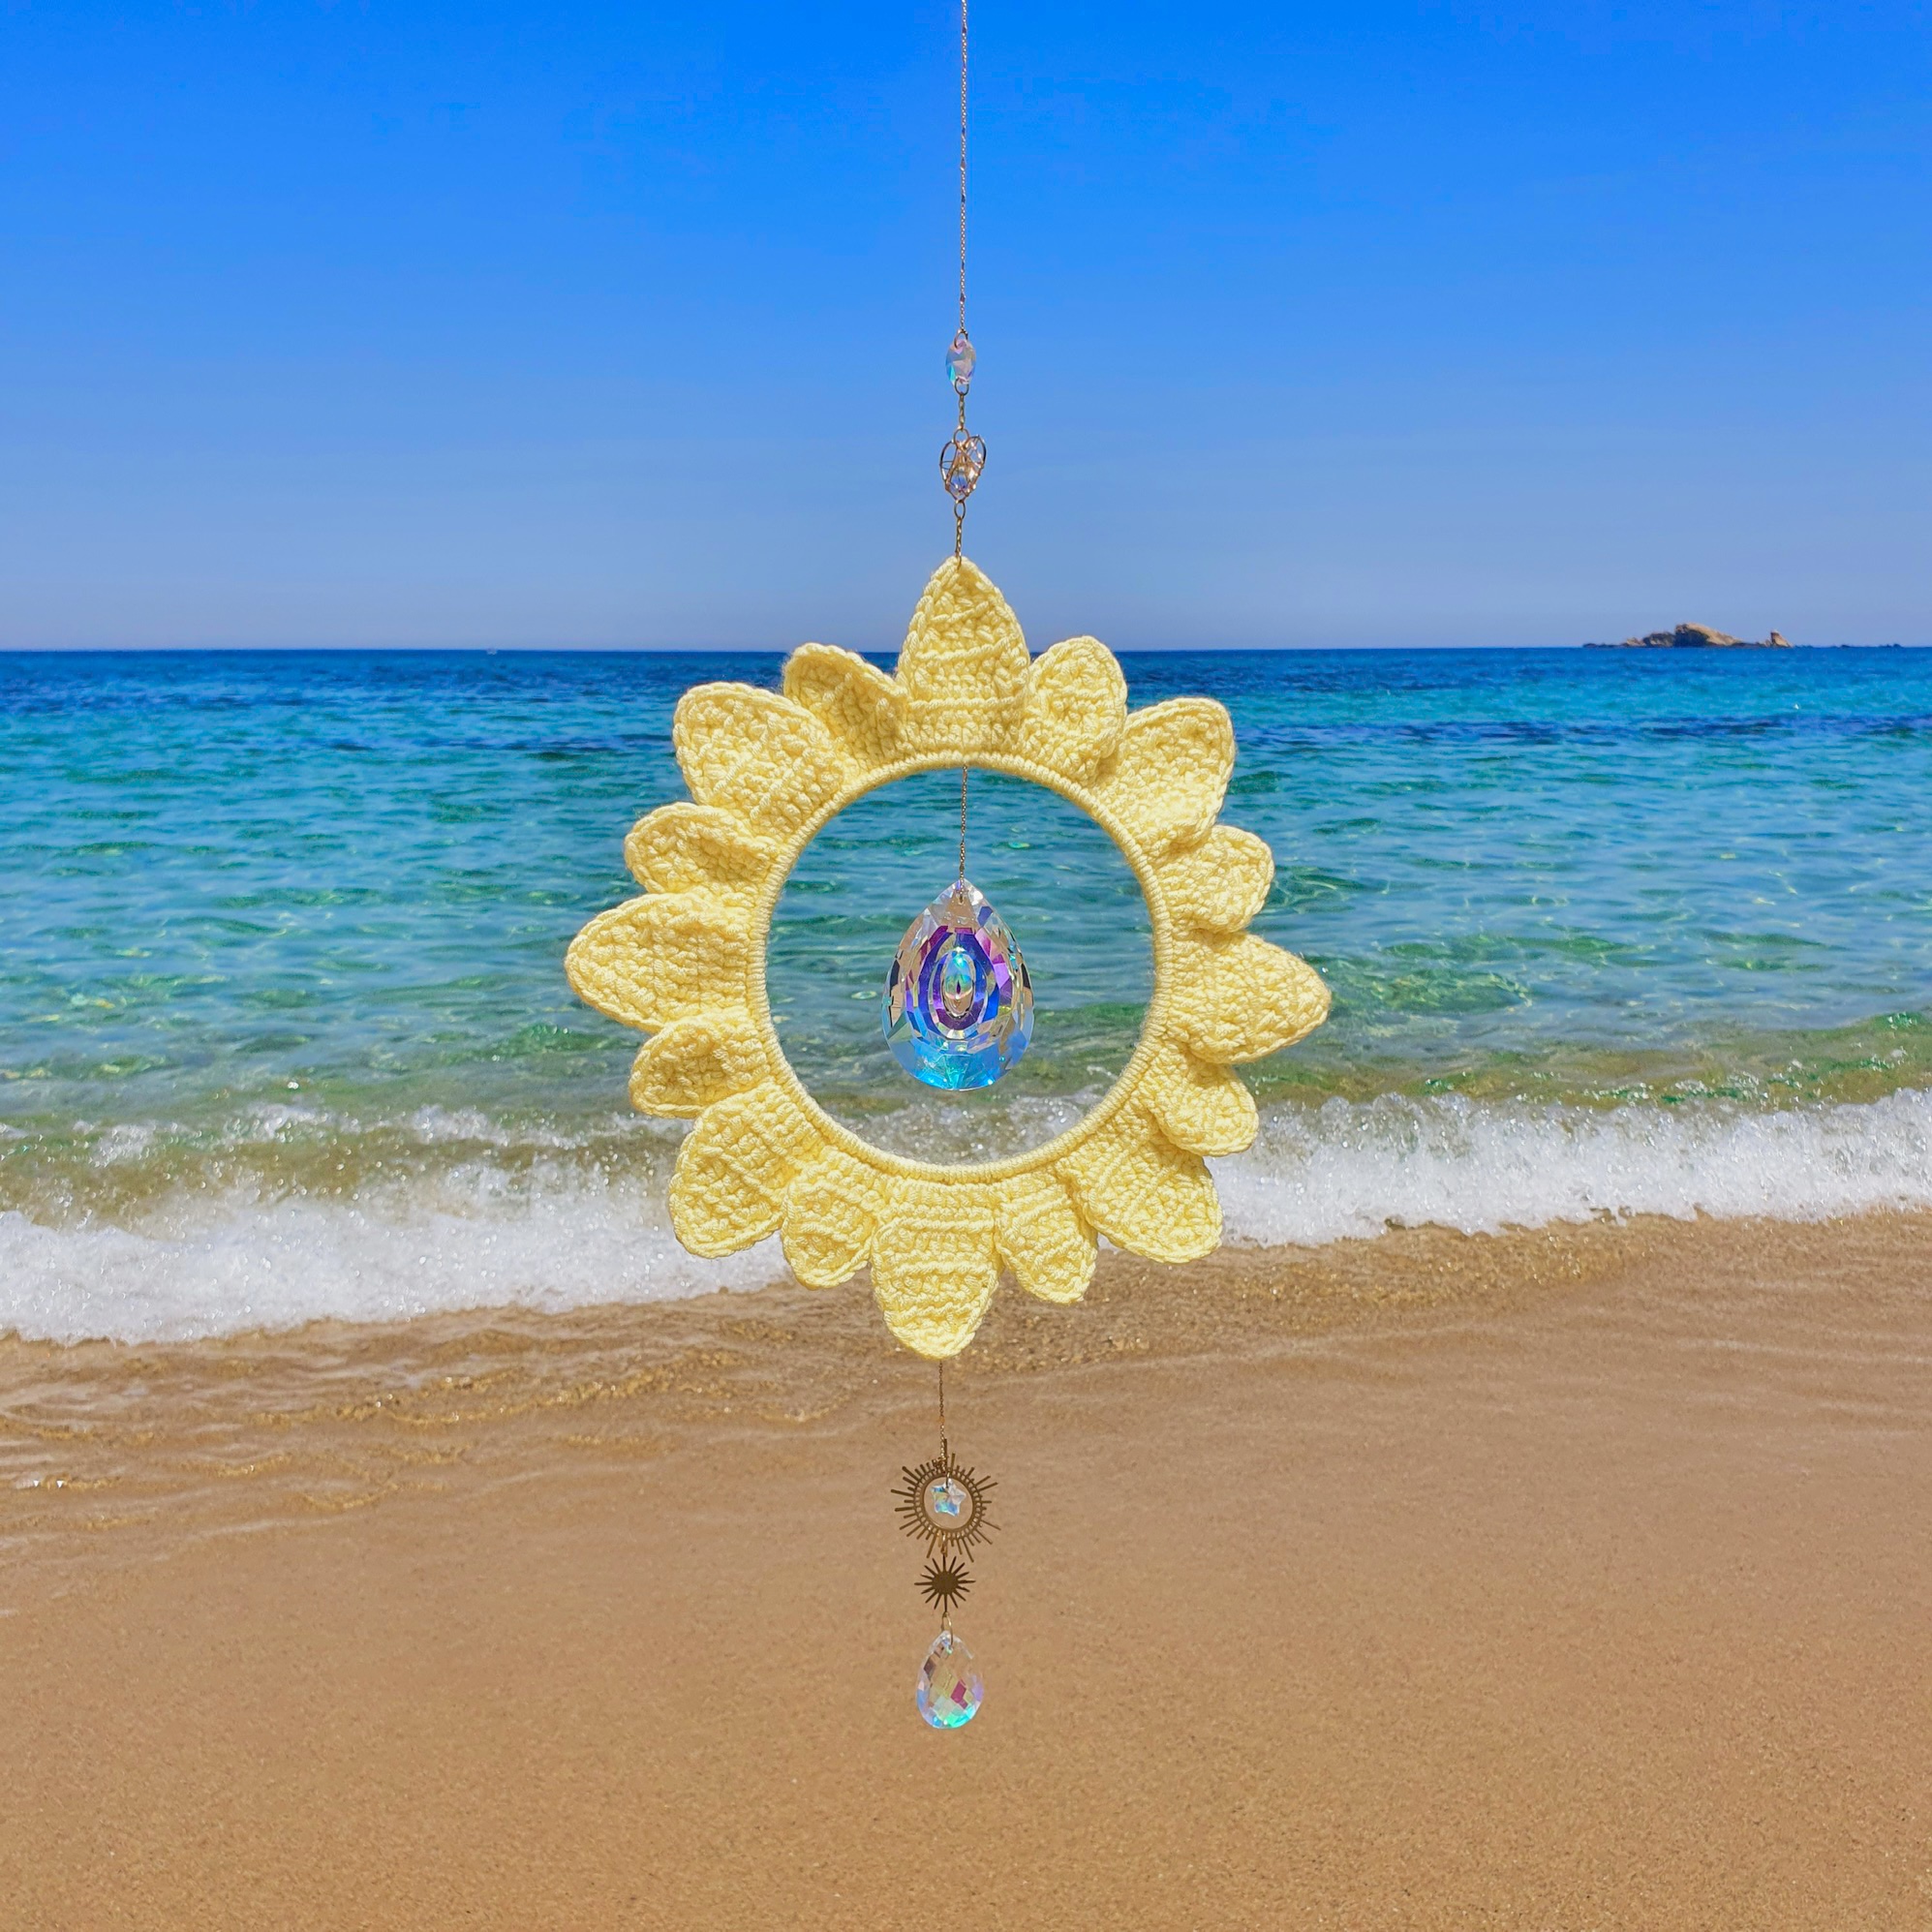 This Is How To Crochet A Suncatcher